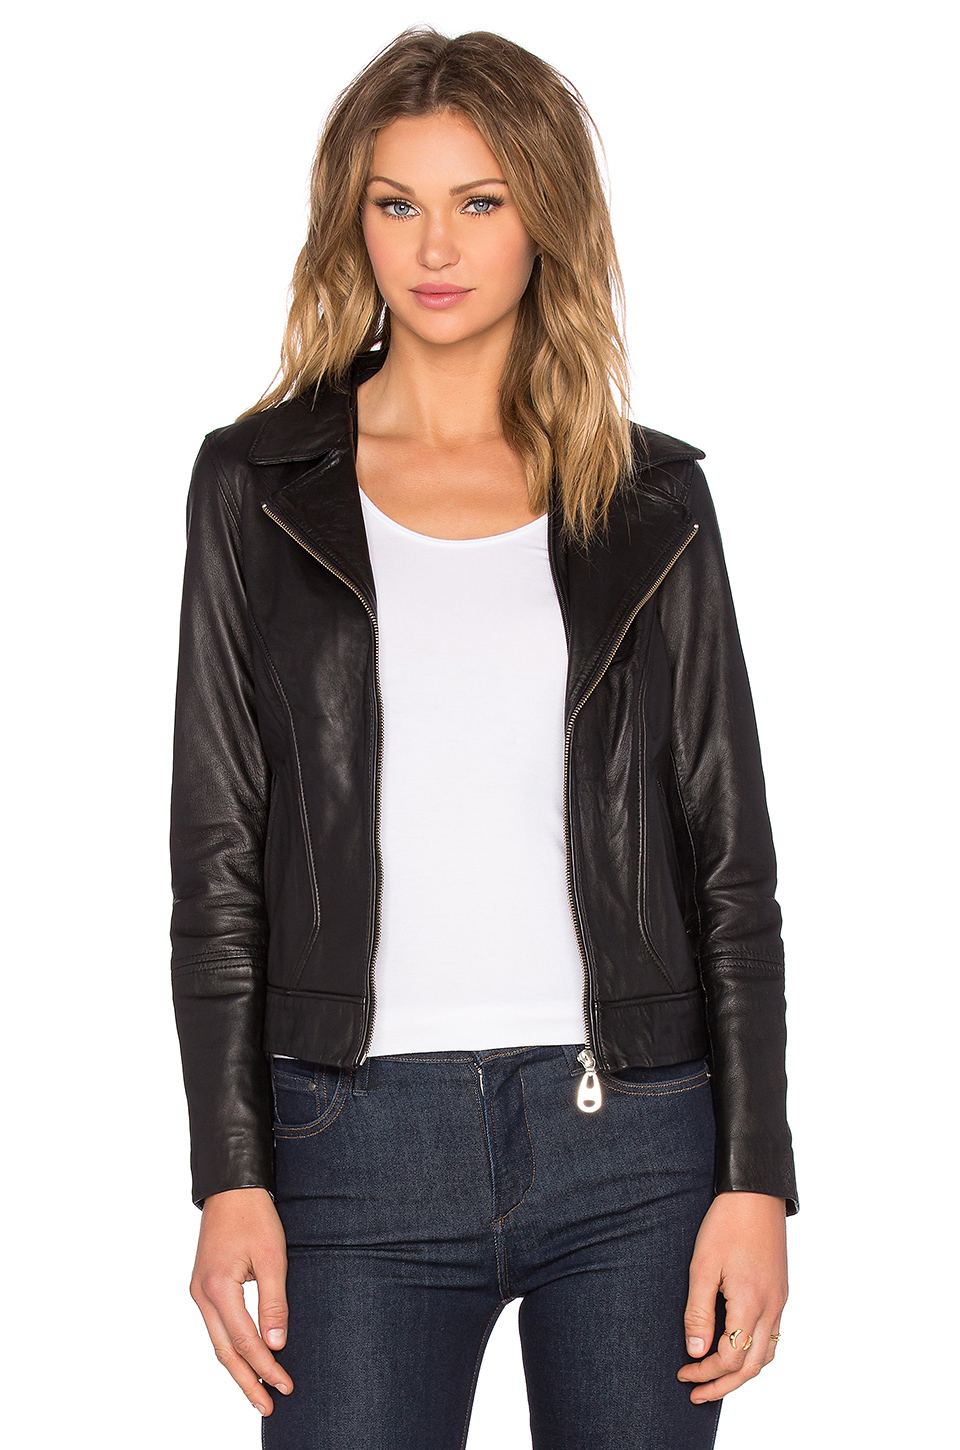 Doma Leather  Black Hooded Leather Jacket  Lyst